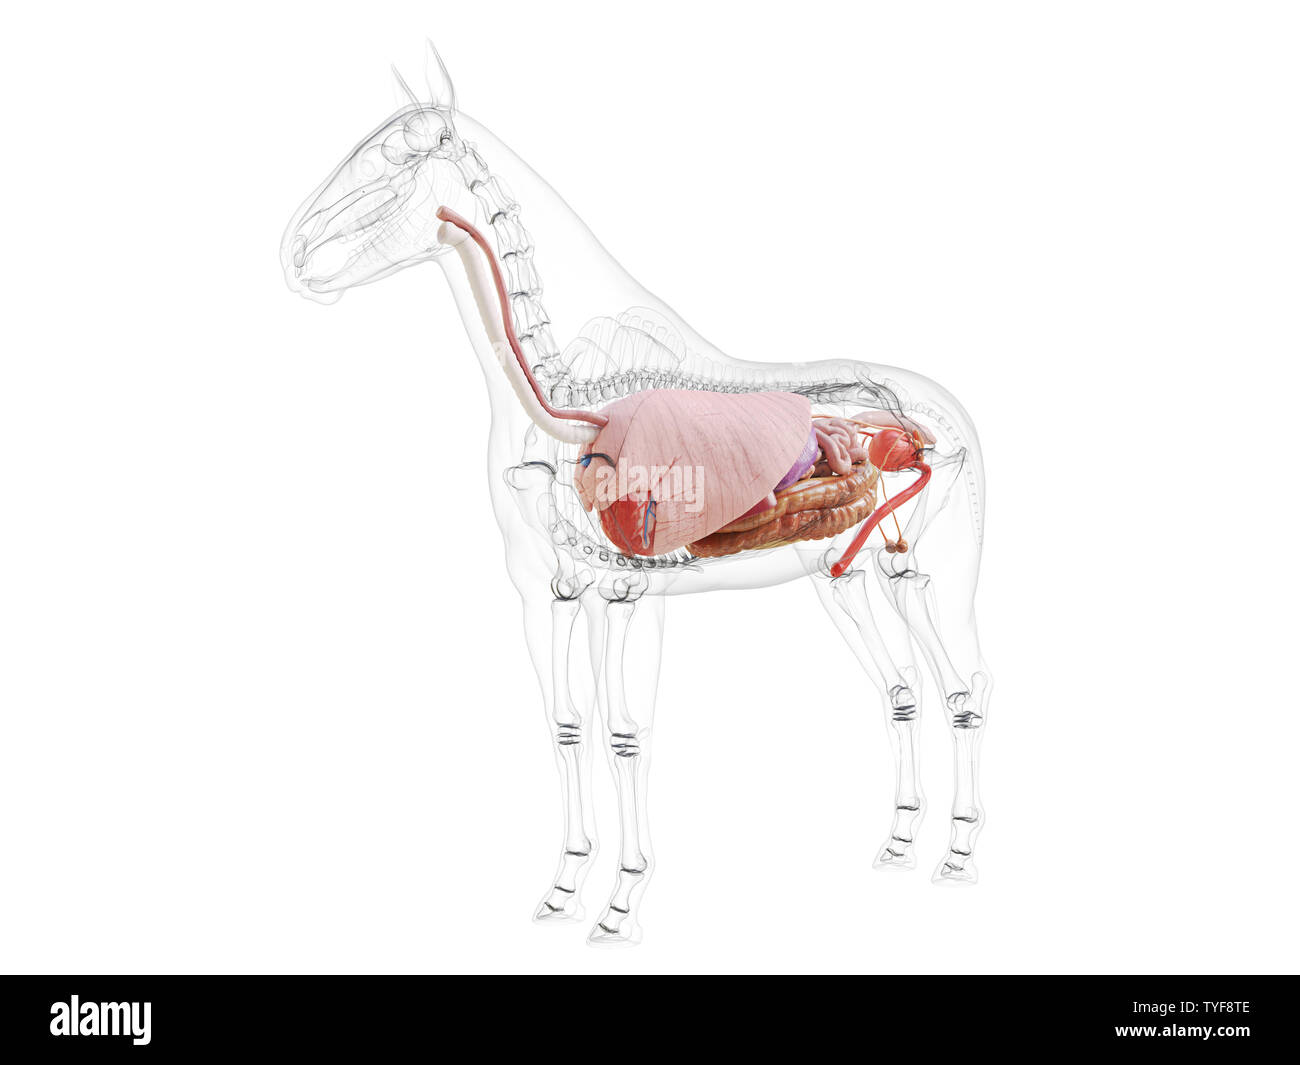 3d rendered medically accurate illustration of the horse anatomy Stock Photo